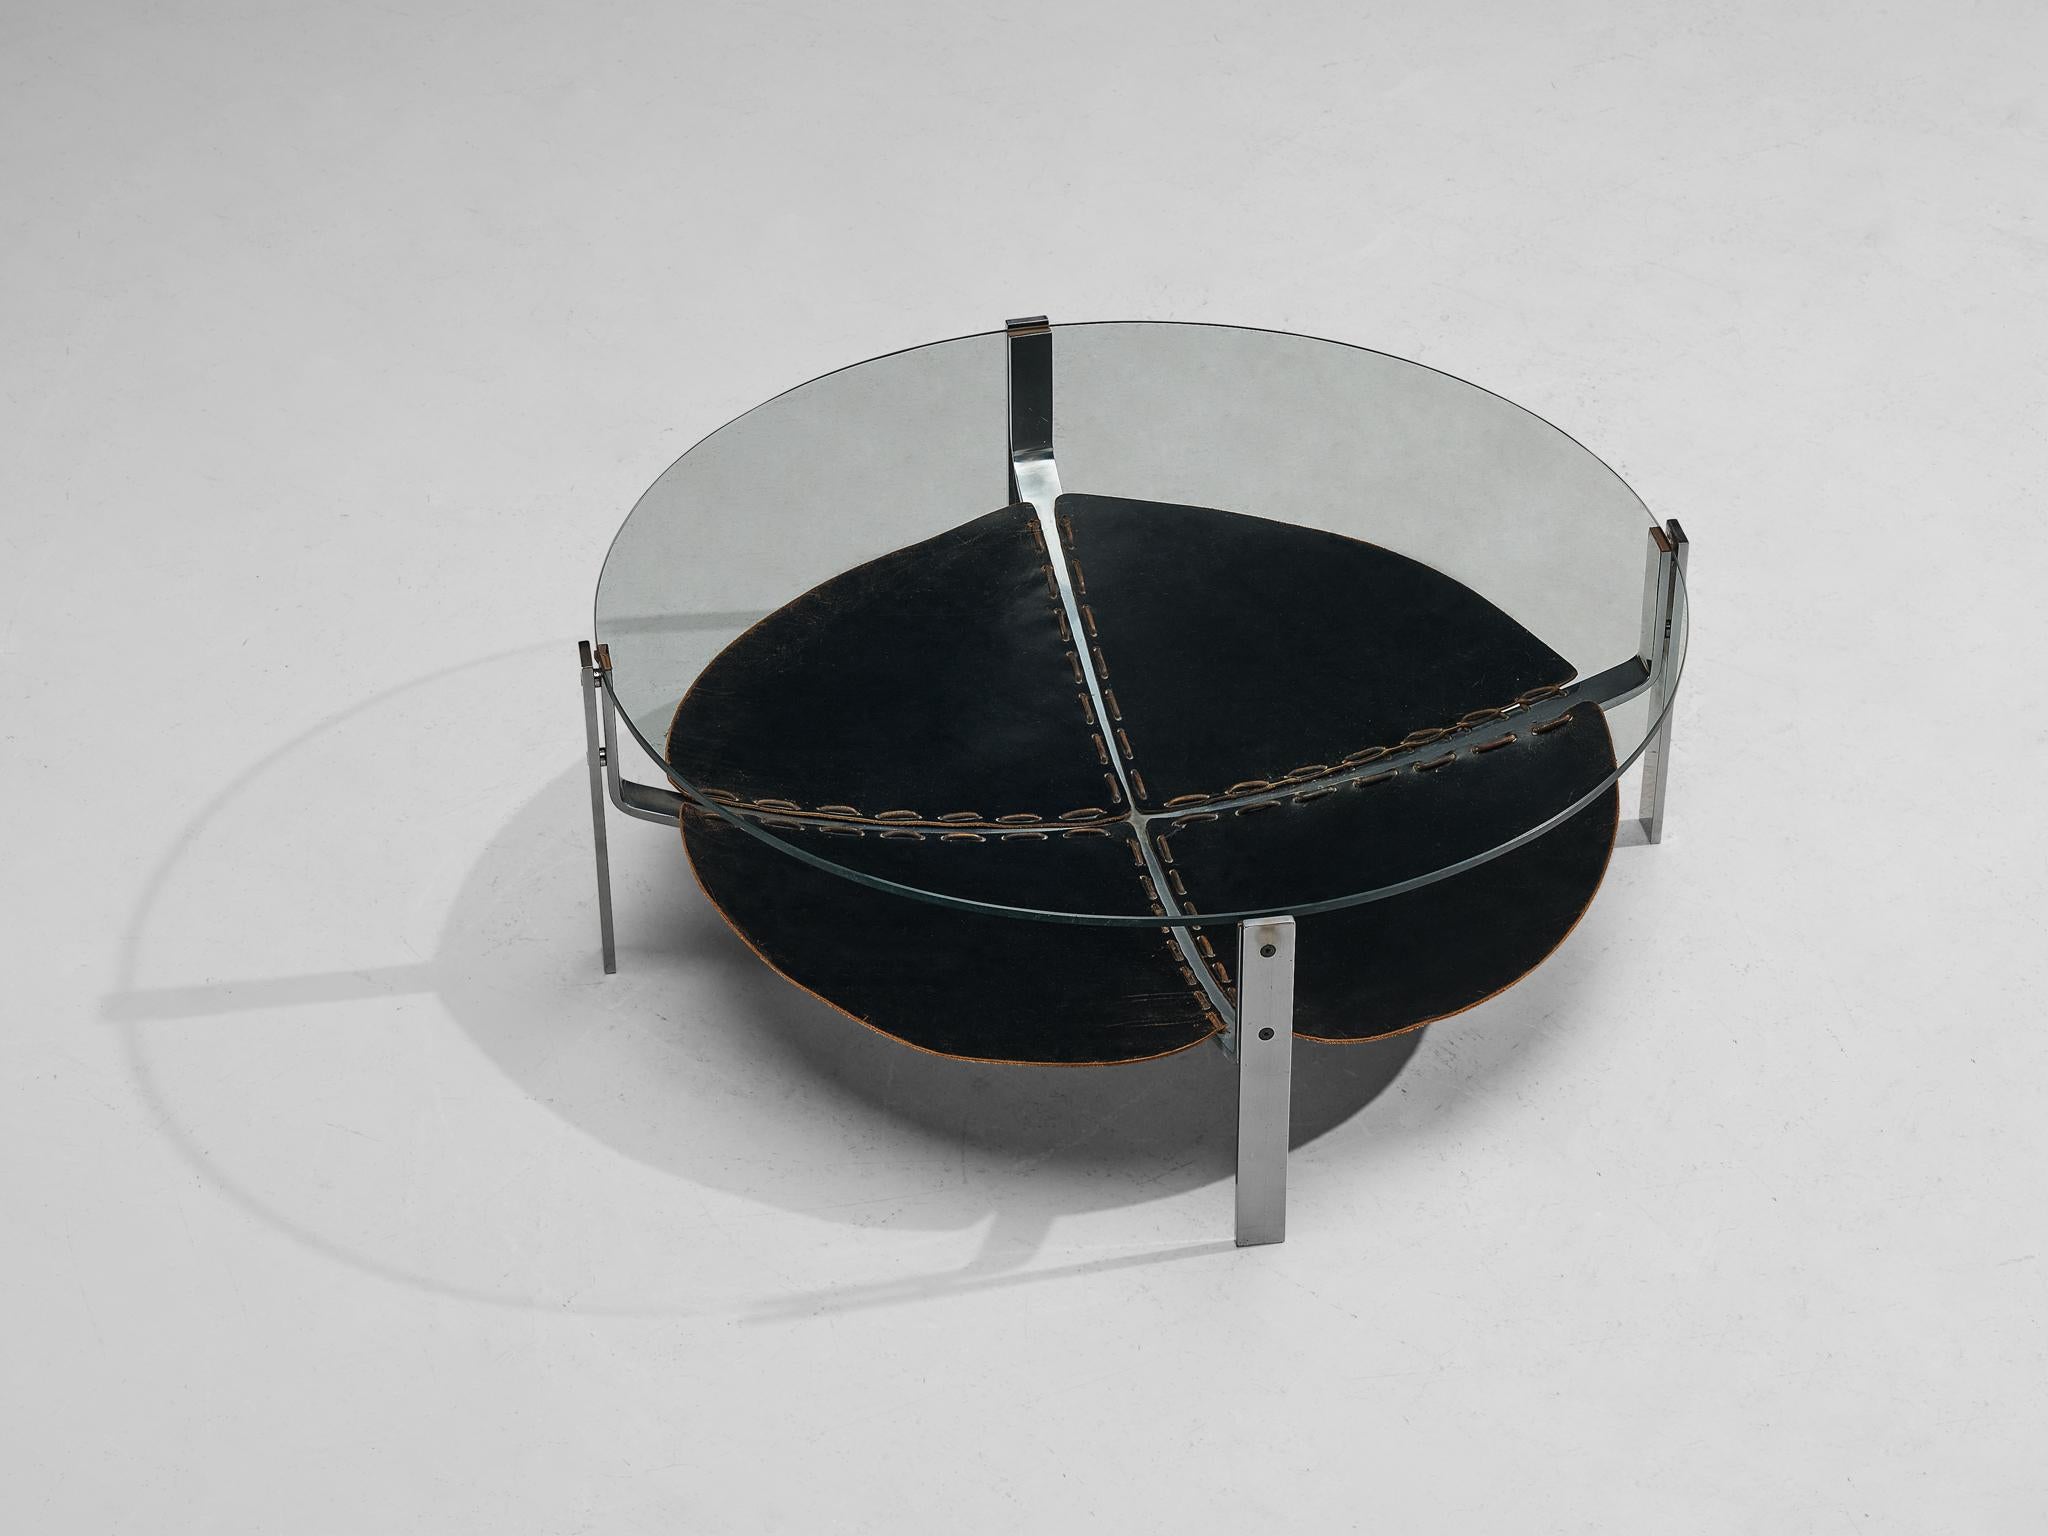 Round coffee table, chrome-plated steel, leather, glass, The Netherlands, 1970s

This round coffee table consist of a metal structure building the four legs. On the level below the glass tabletop, a beautifully patinated black leather 'shelve' is